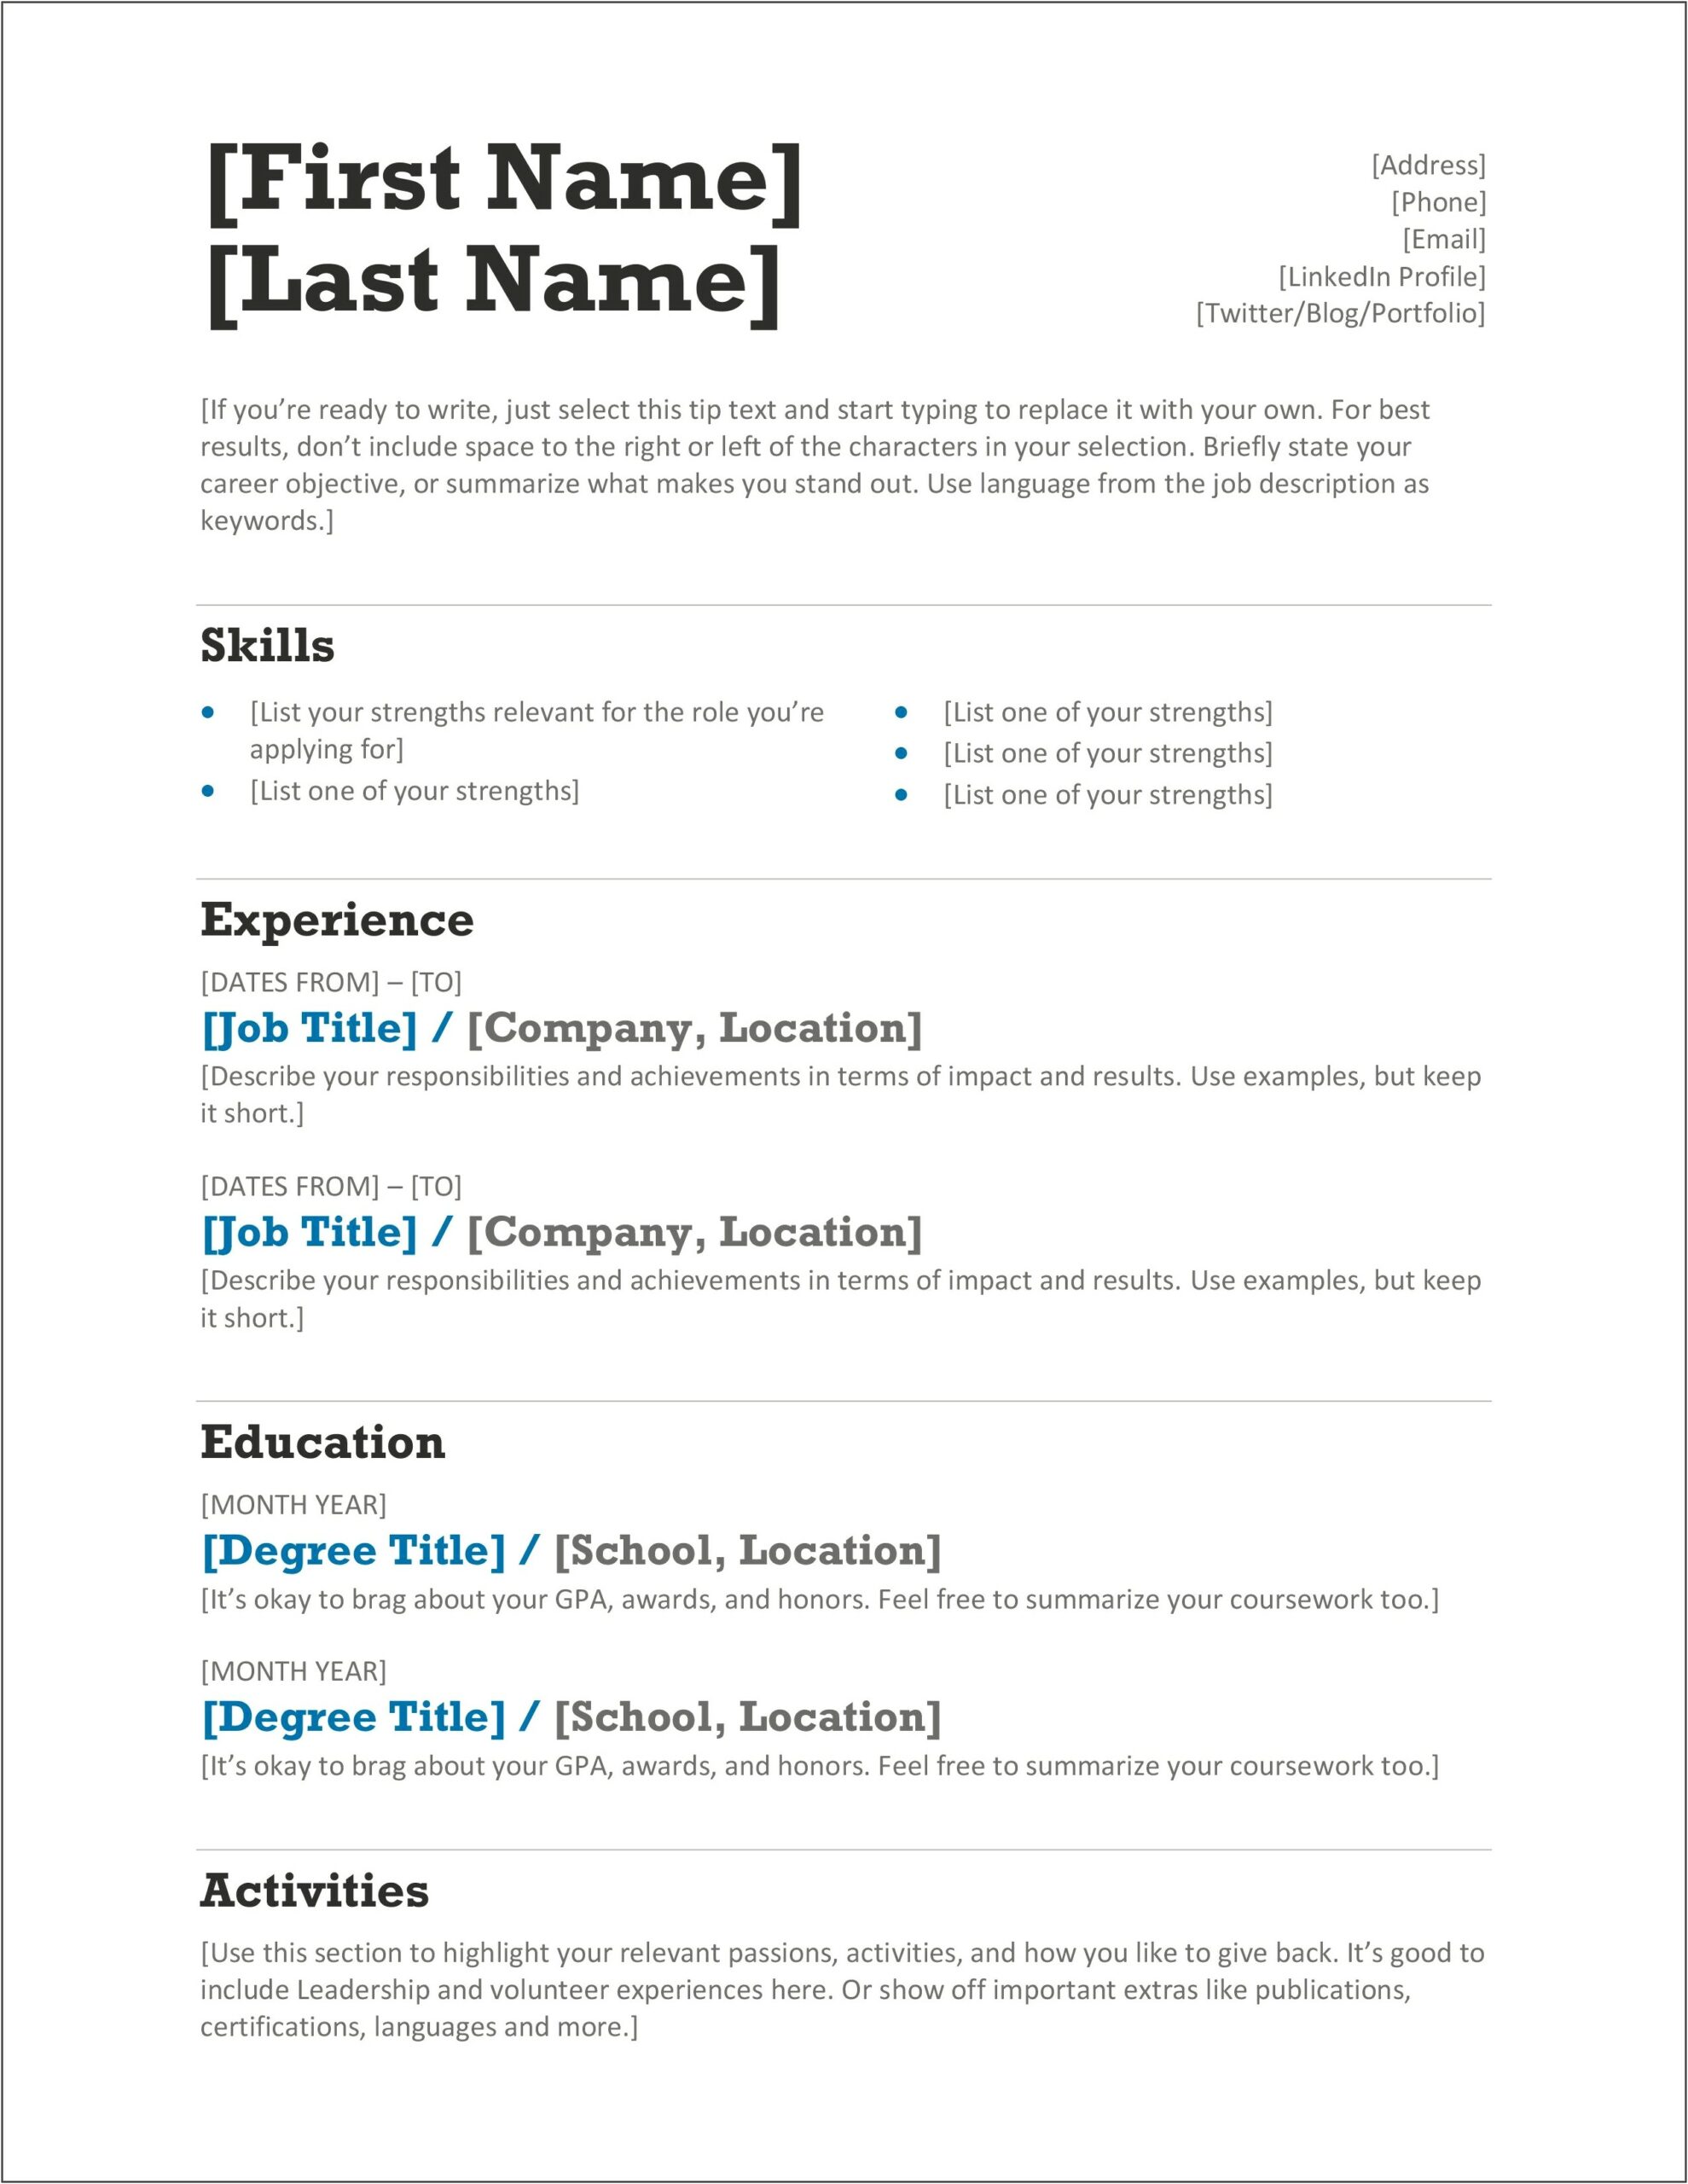 Best To Send Resume In Docx Or Pdf